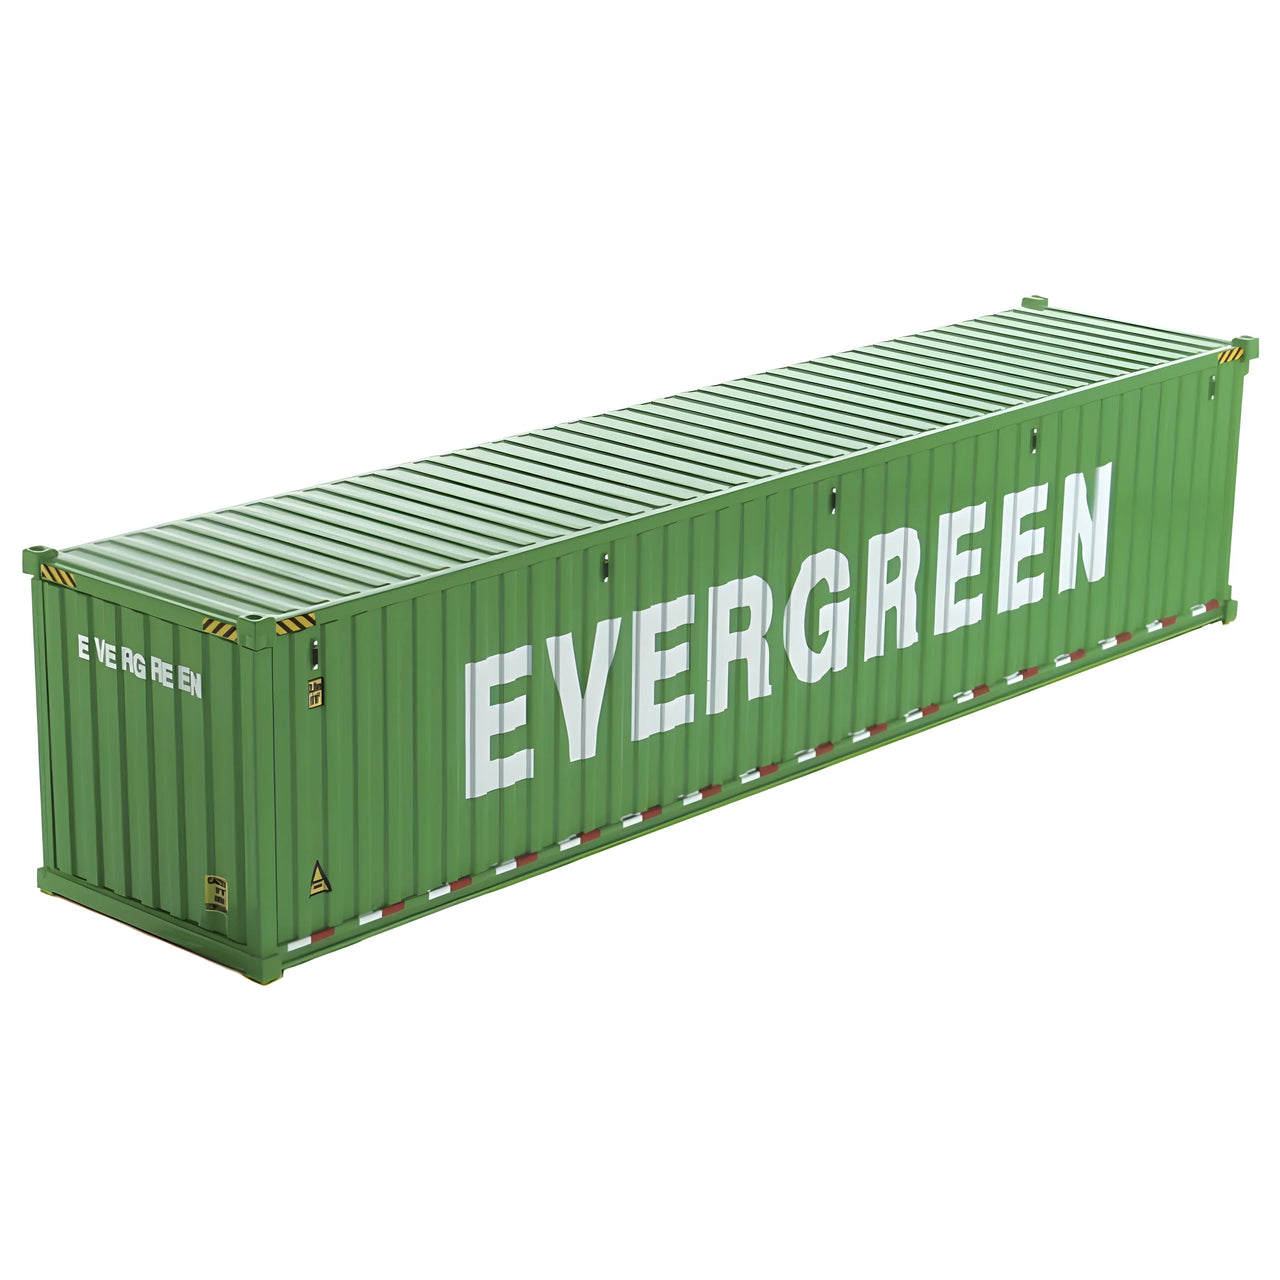 91027D 40' Dry Goods Sea Container 1:50 Scale